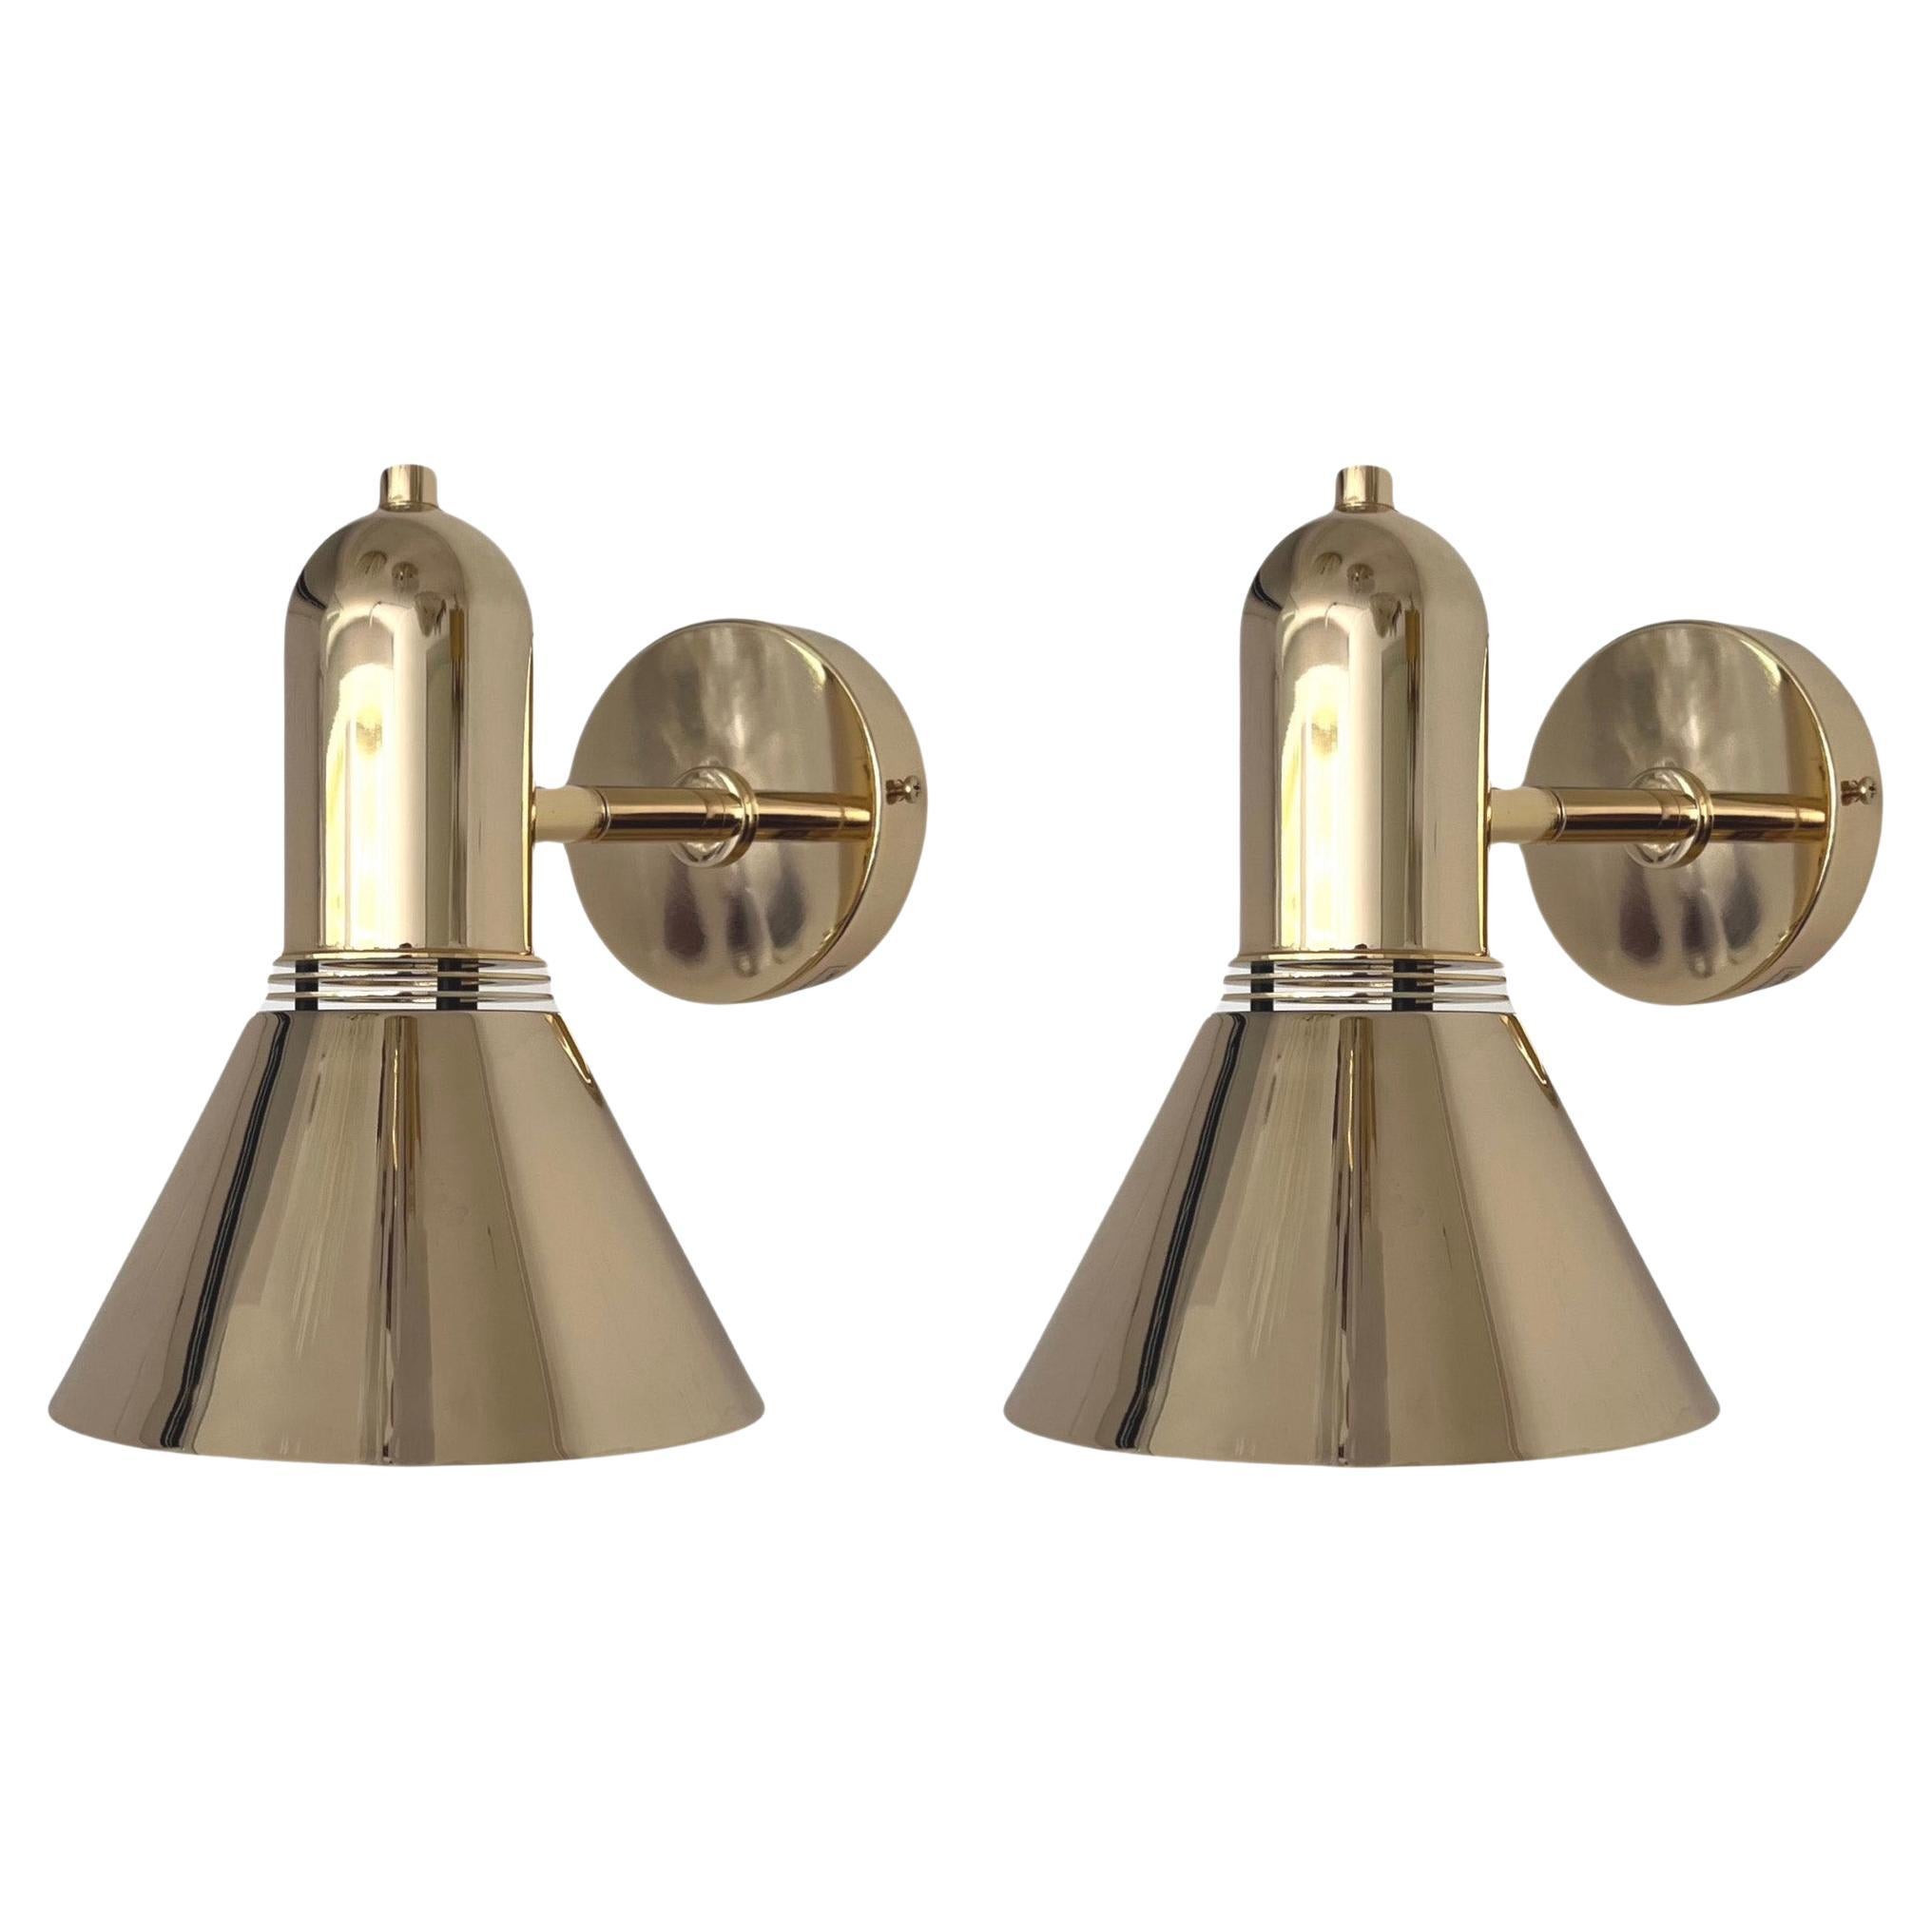 Mid-Century Articulated Pair of Gold Wall Sconces by Estiluz, Barcelona, 1970s